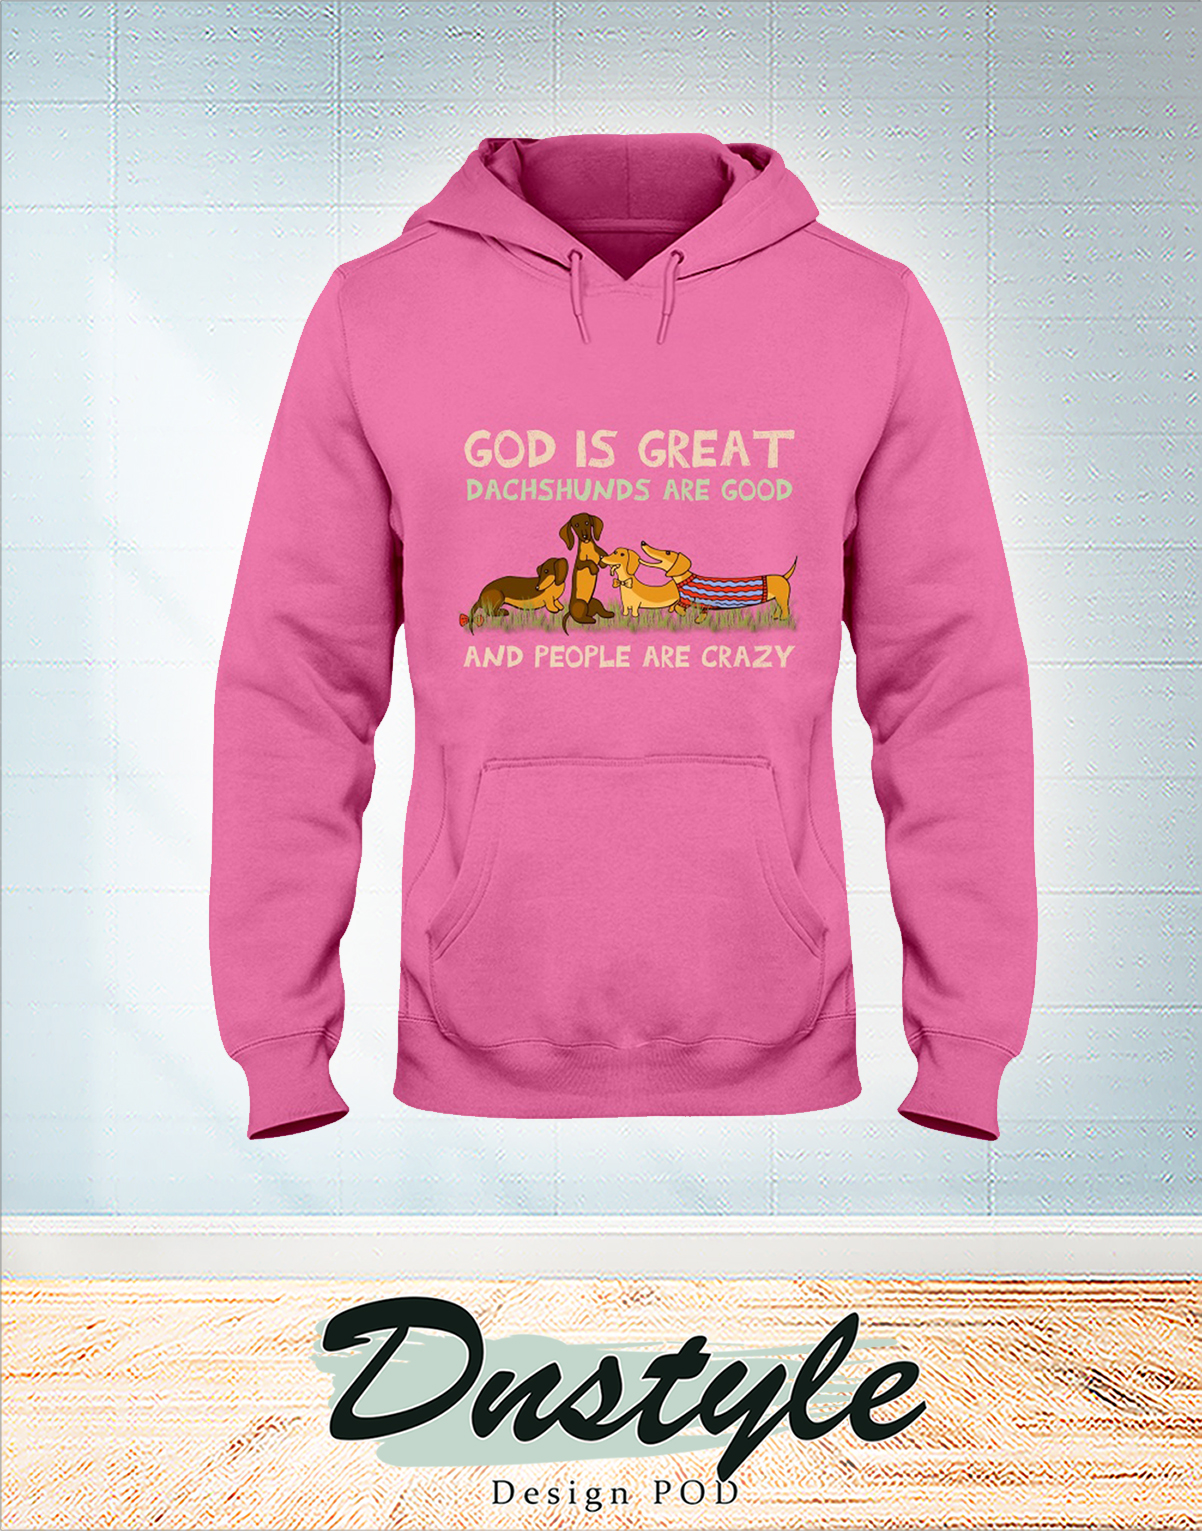 God is great dachshunds are good and people are crazy hoodie